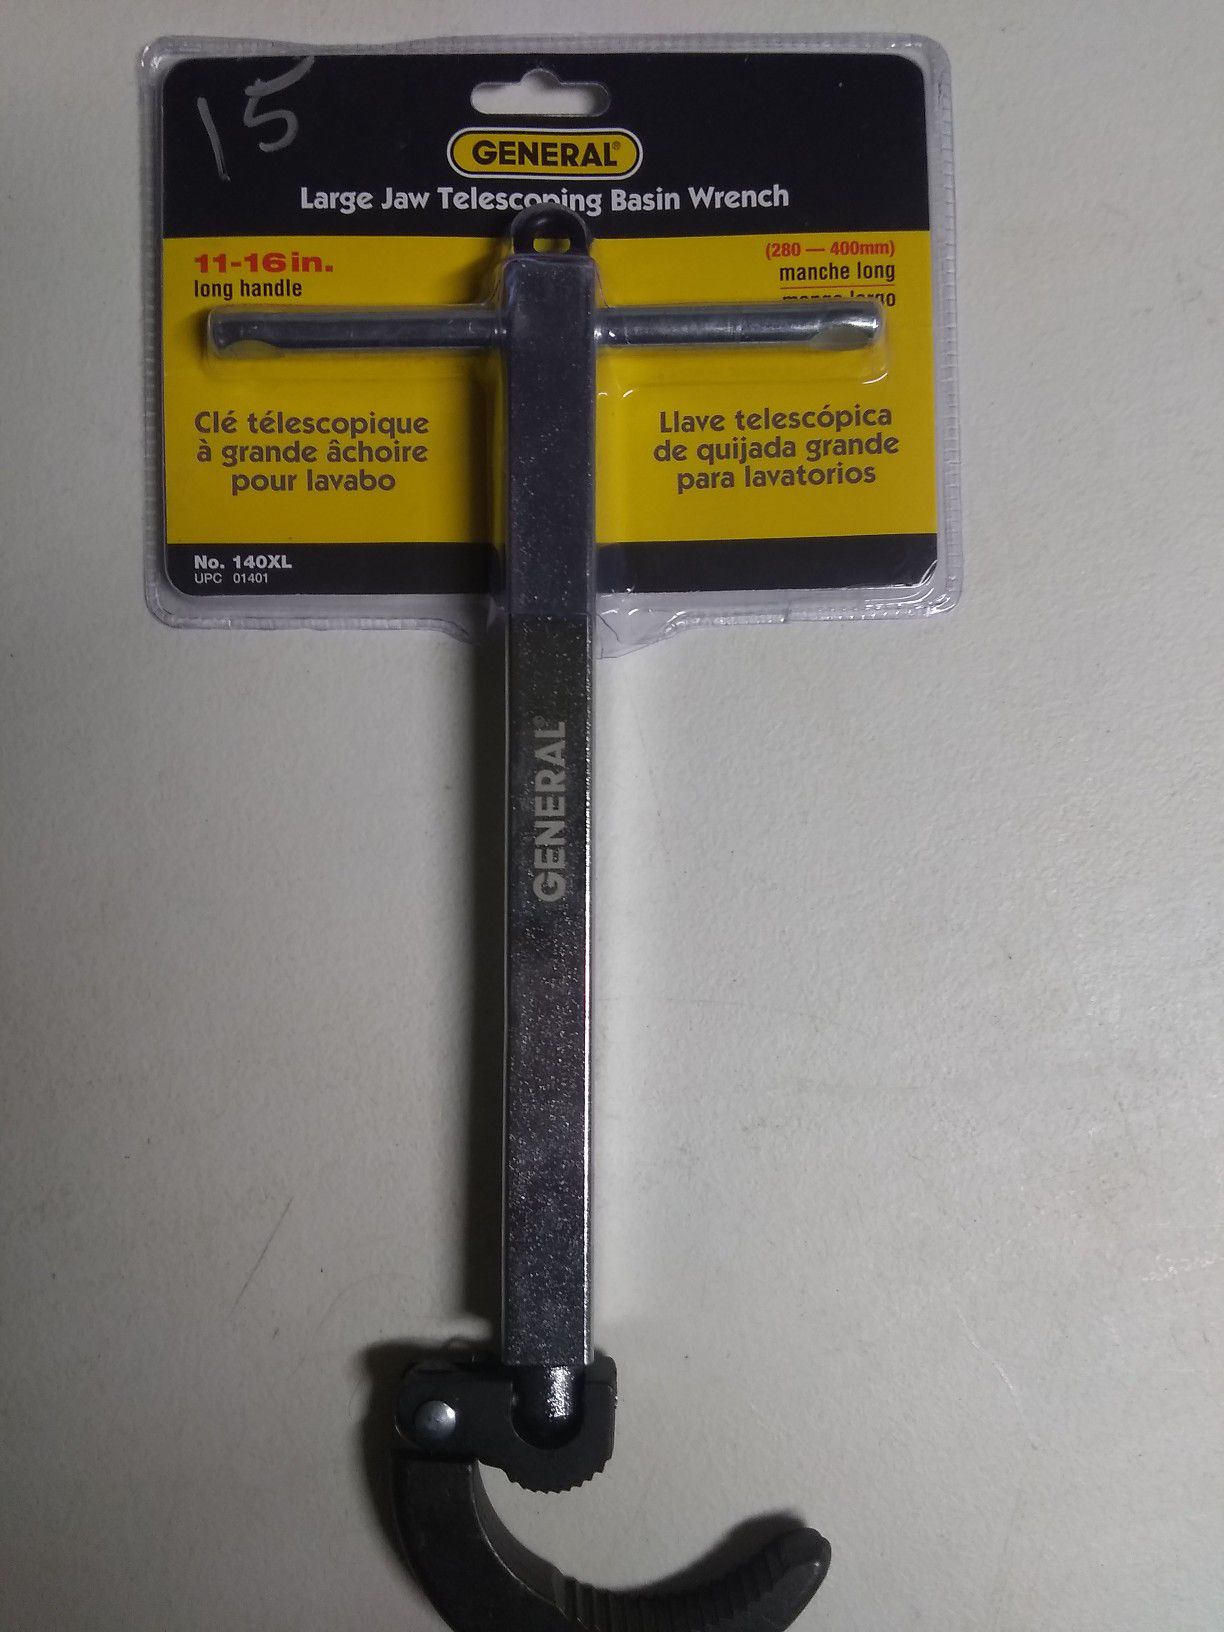 Large jaw telescoping basin wrench